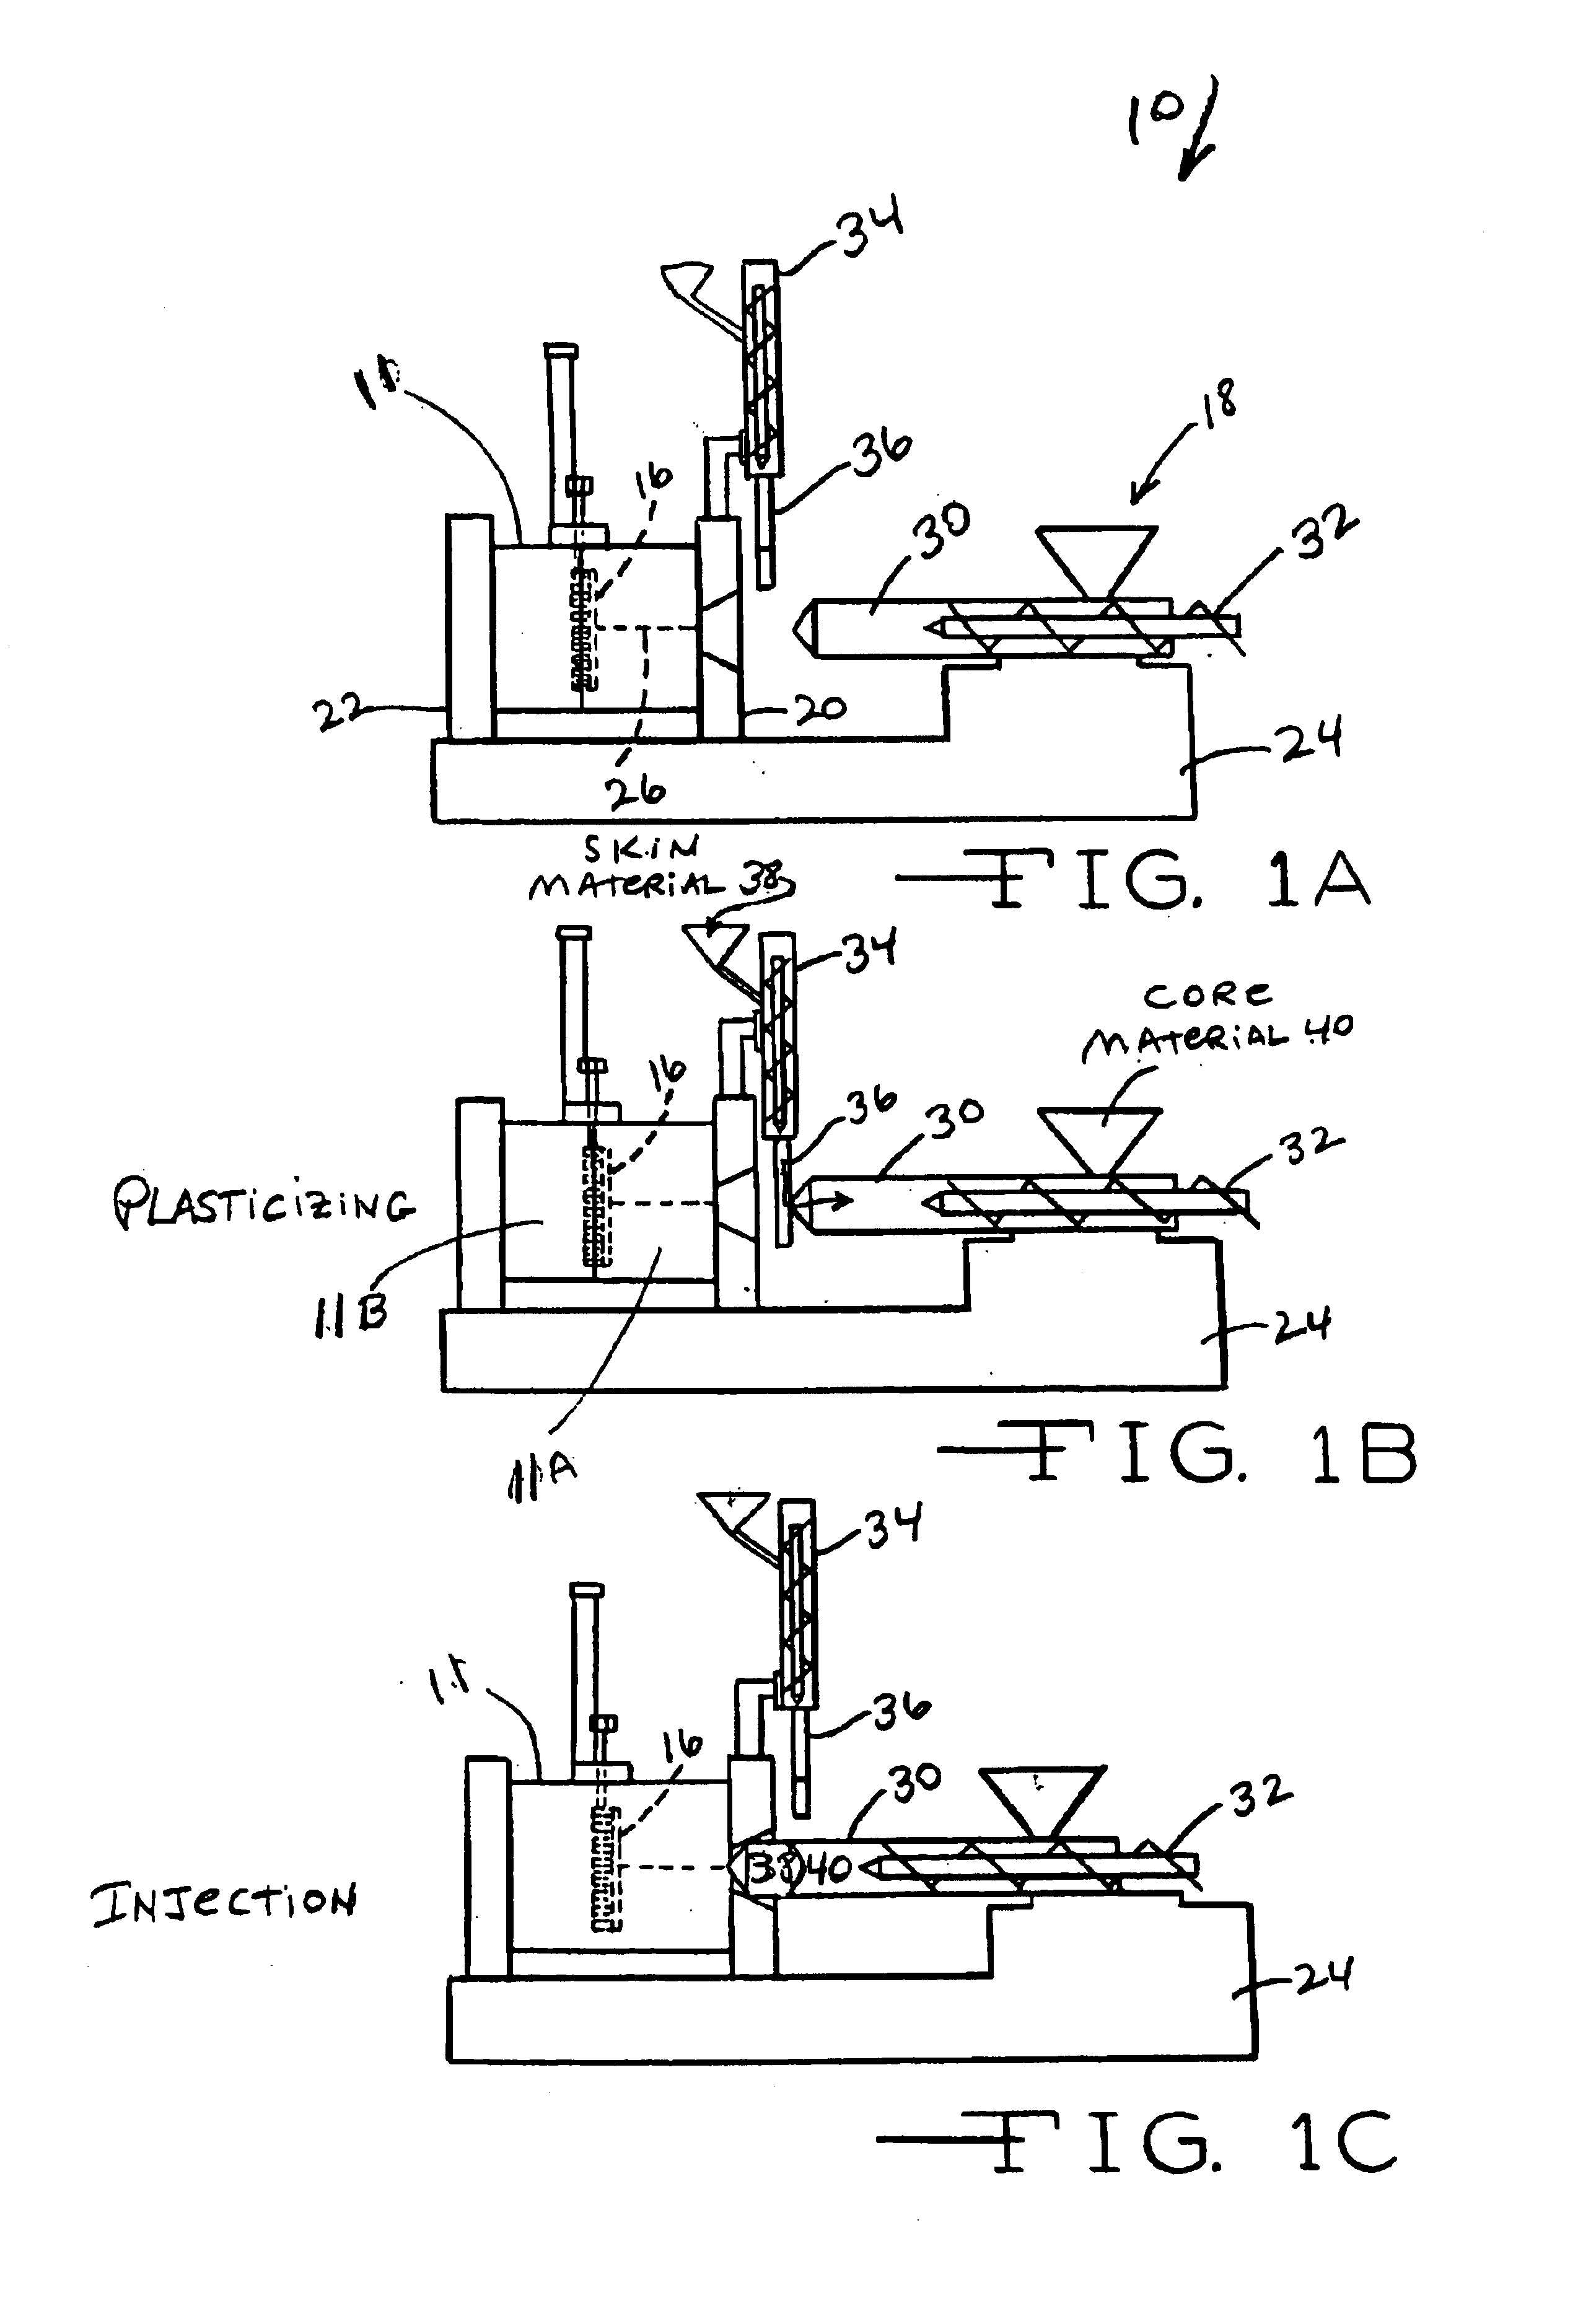 Module for a modular conveyor belt having a sandwich layer construction and method of manufacture